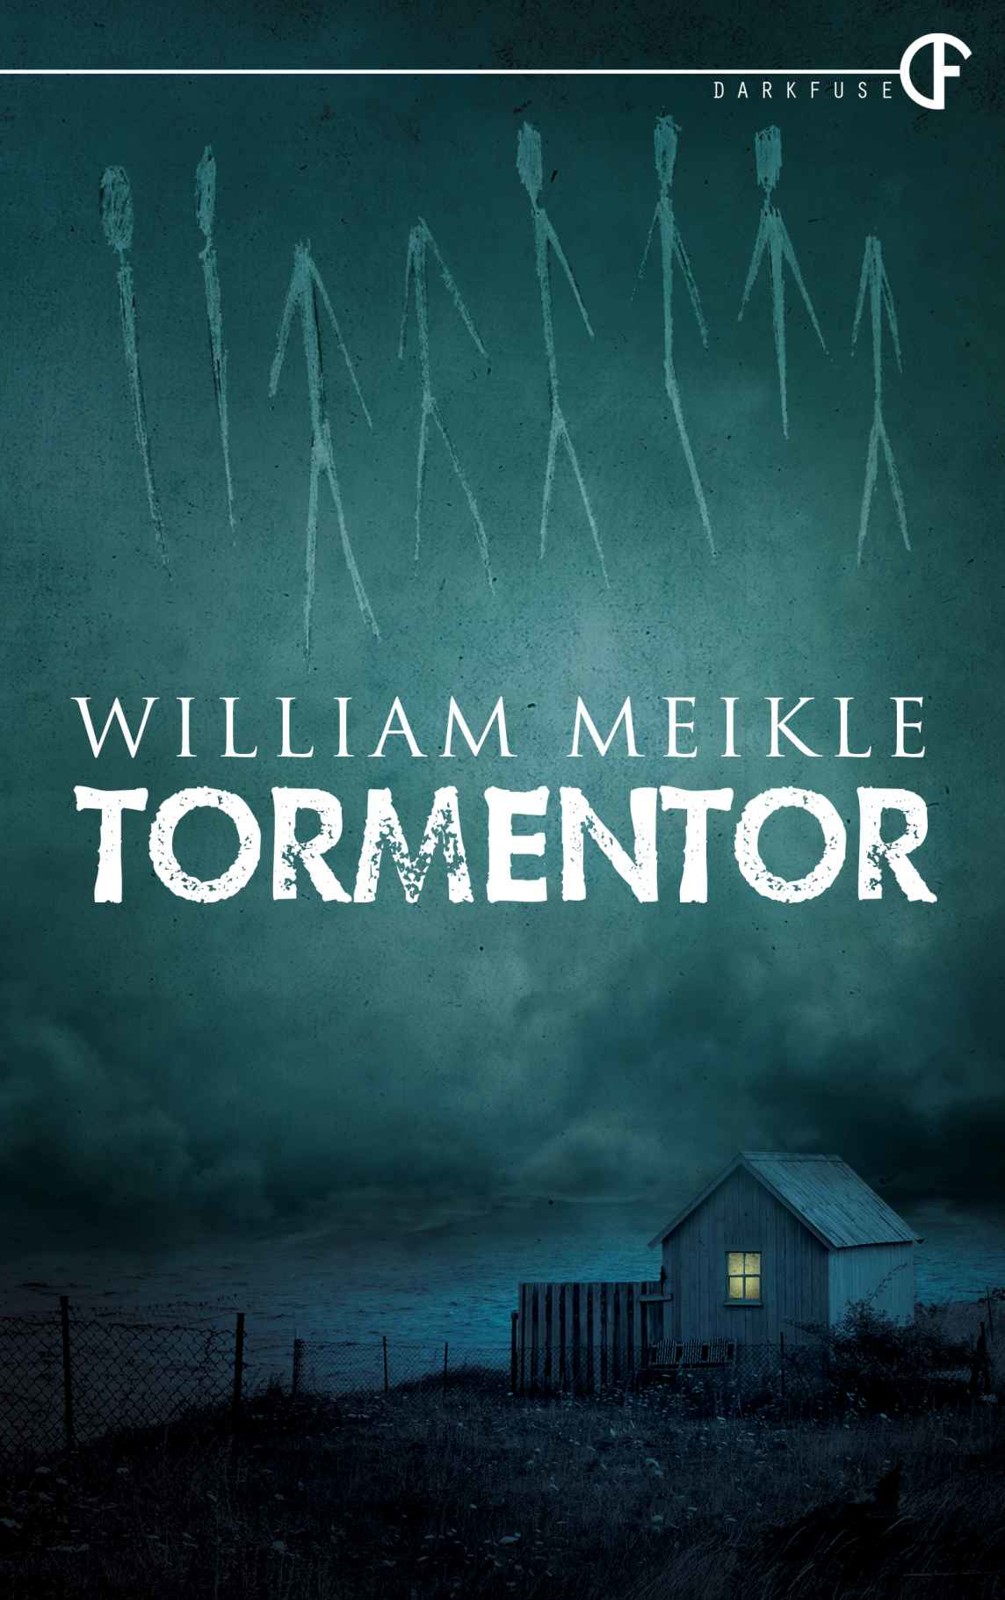 Tormentor by William Meikle